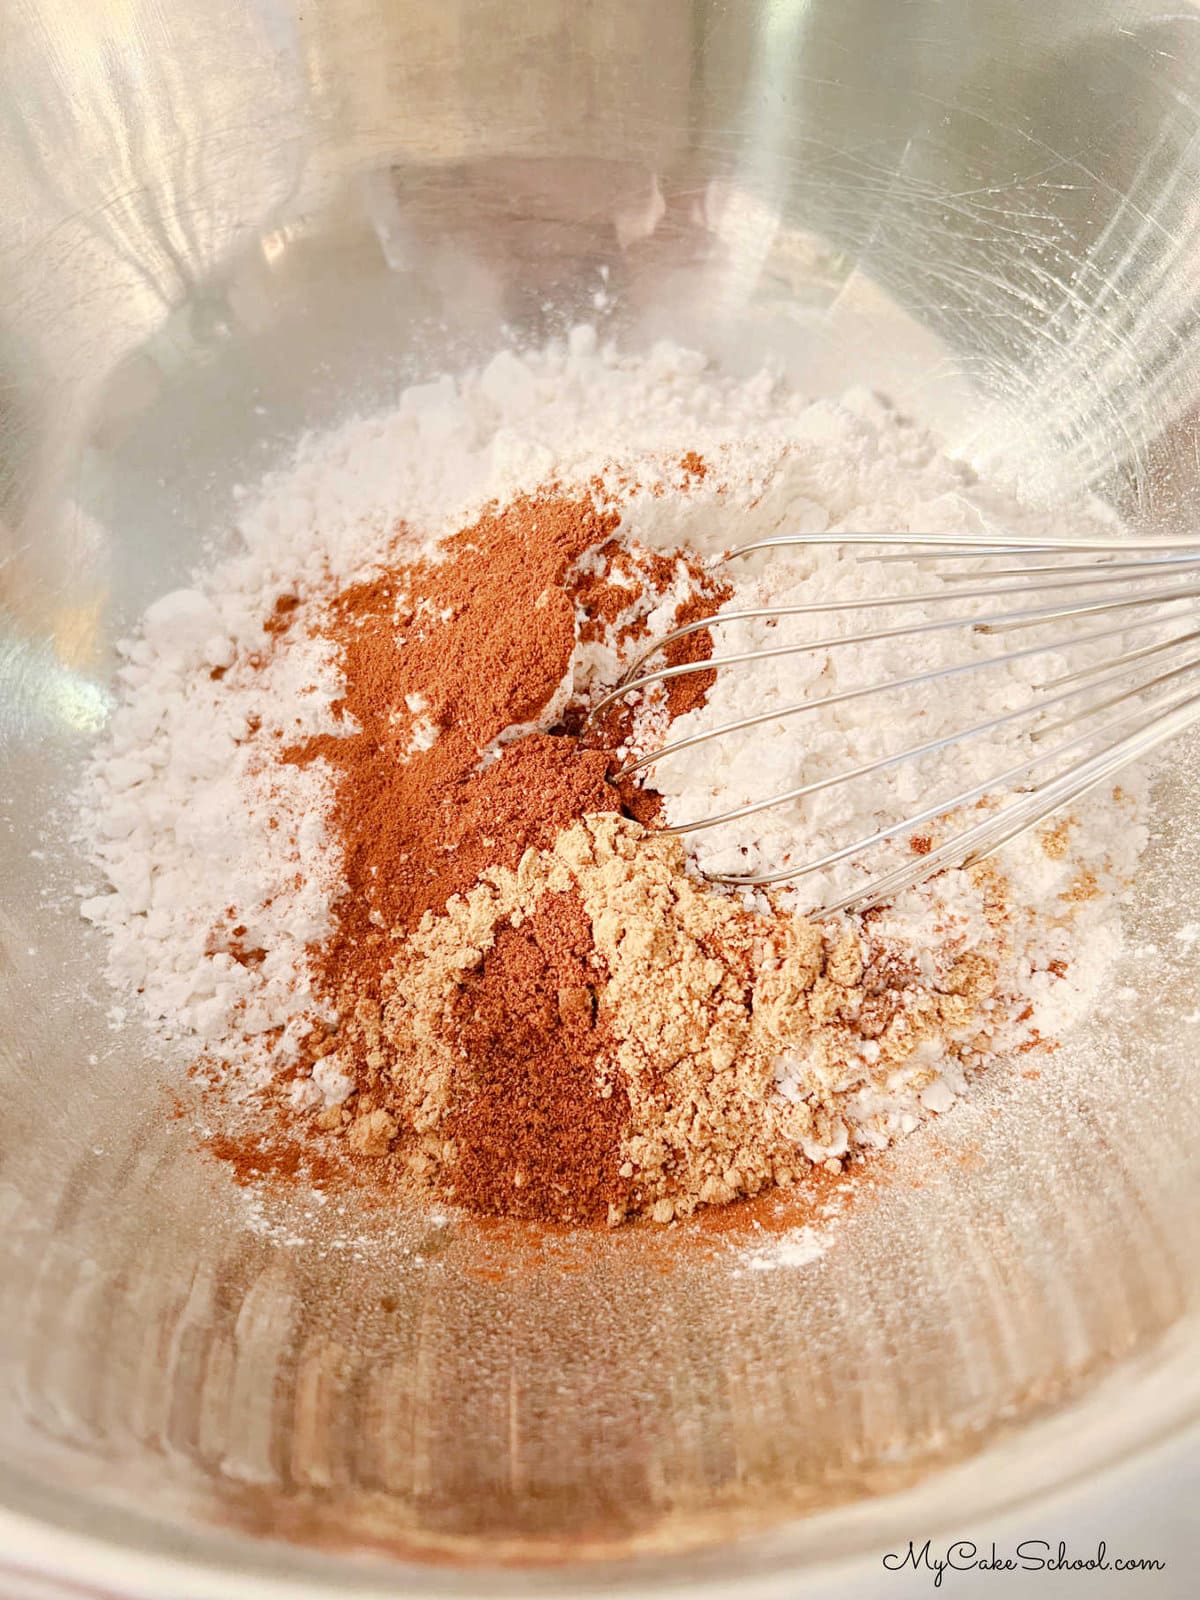 Bowl of flour, spices, and baking powder